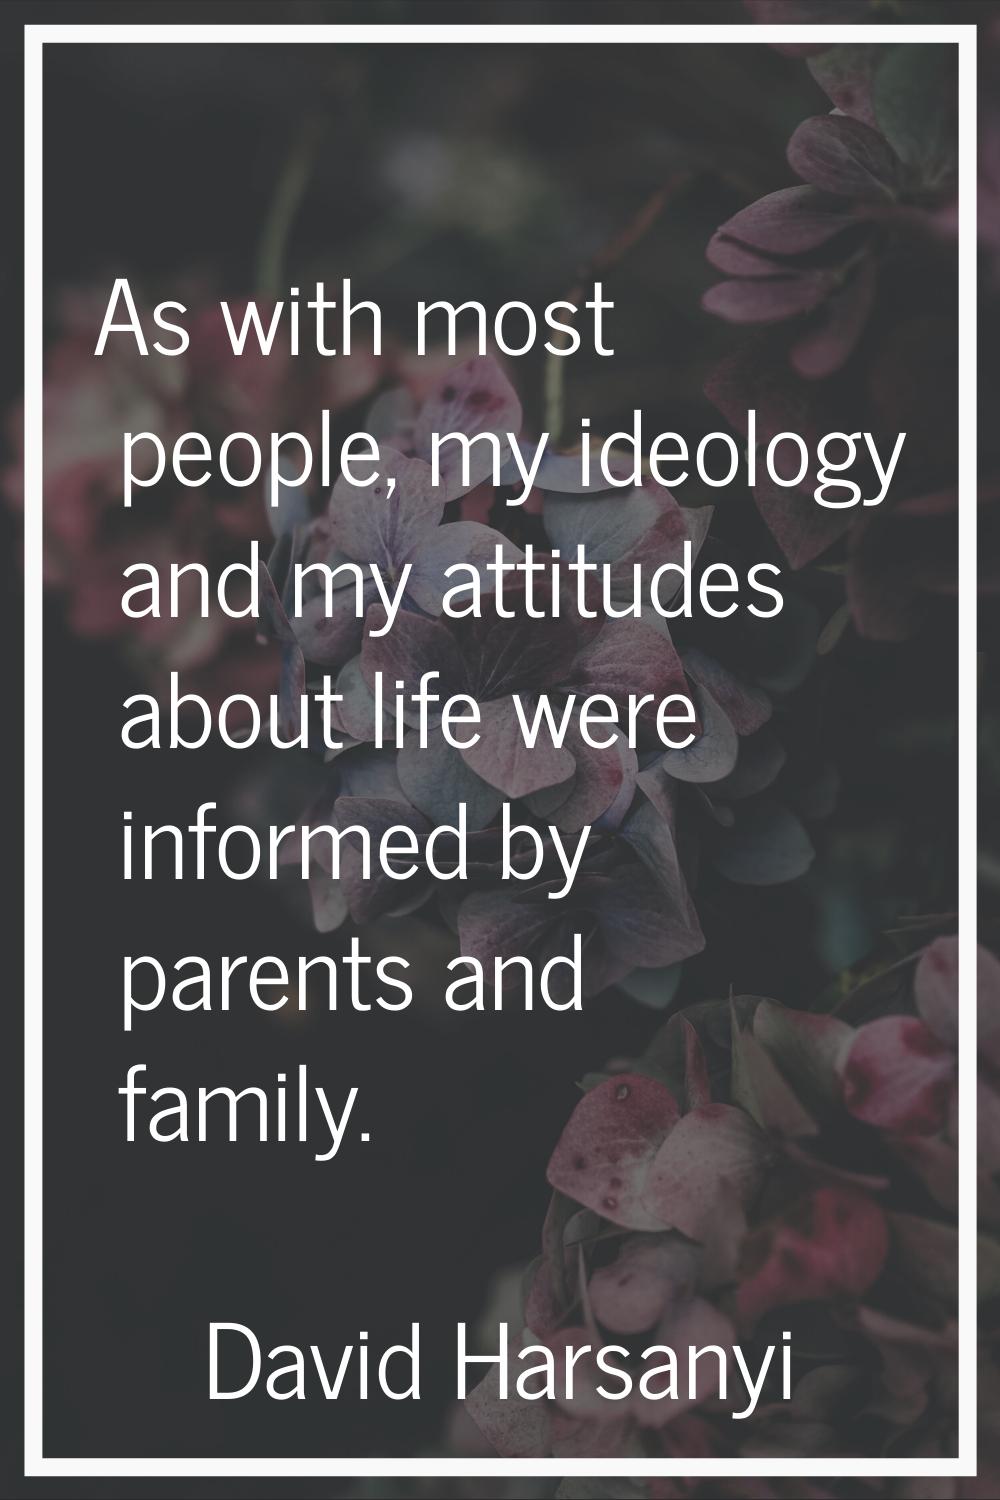 As with most people, my ideology and my attitudes about life were informed by parents and family.